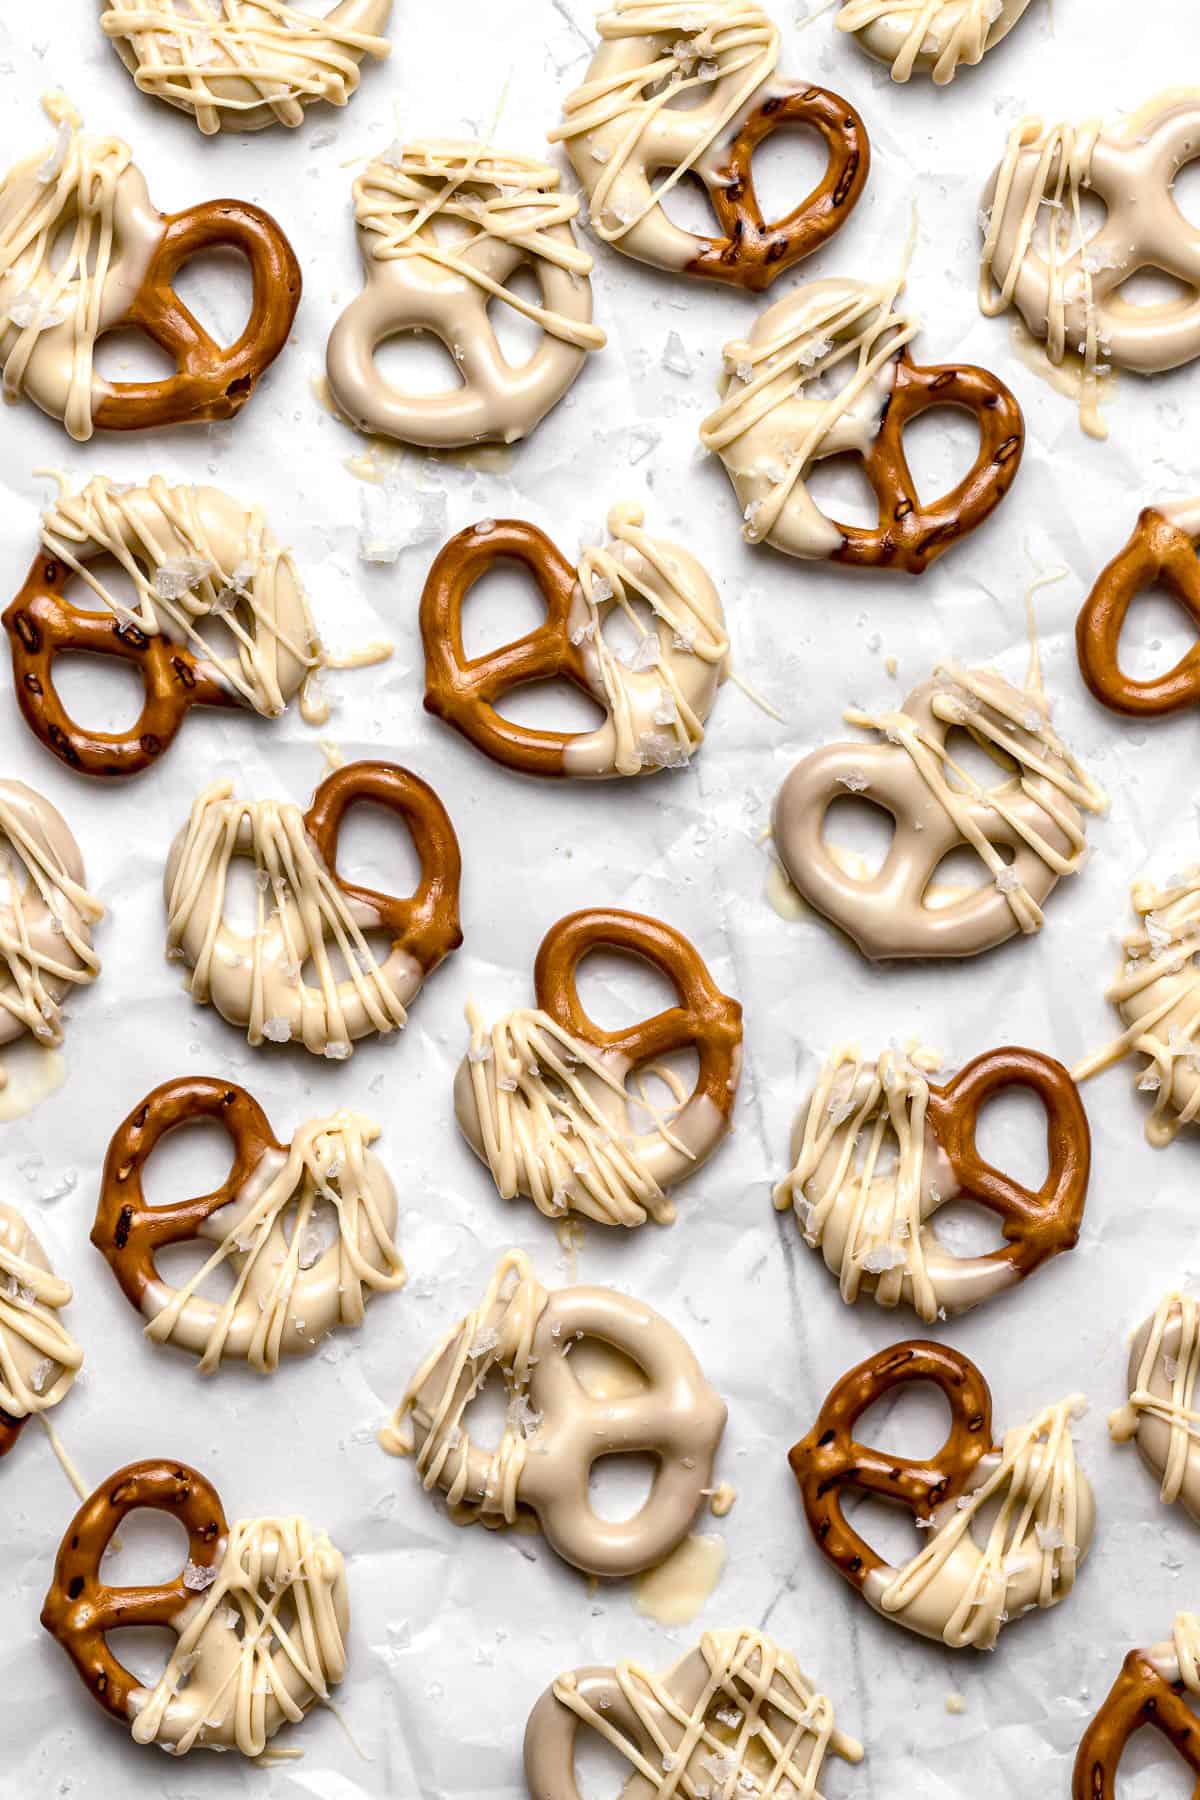 white chocolate covered pretzels on parchment paper.